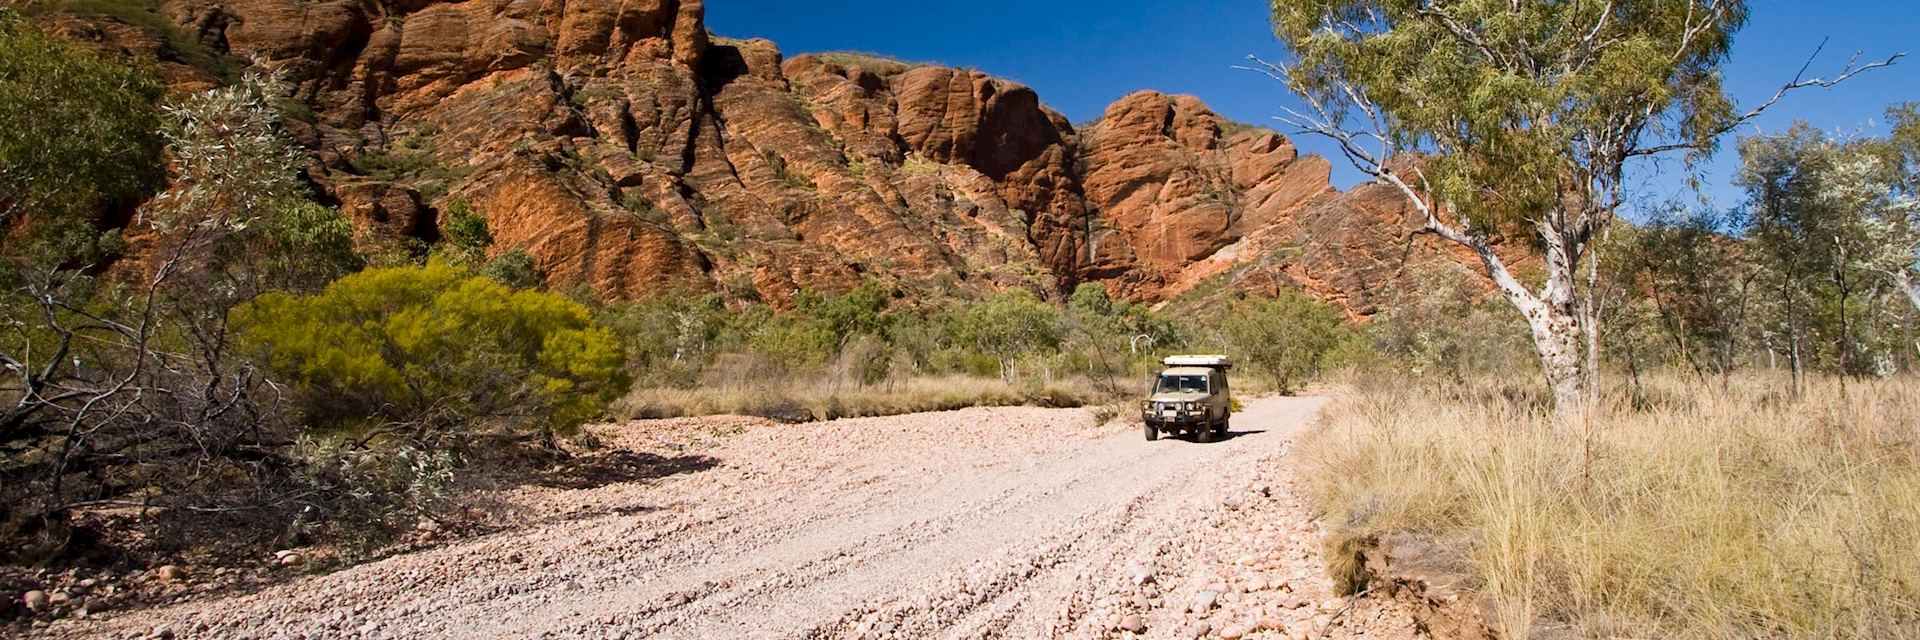 Visit The Kimberley On A Trip To Australia Audley Travel